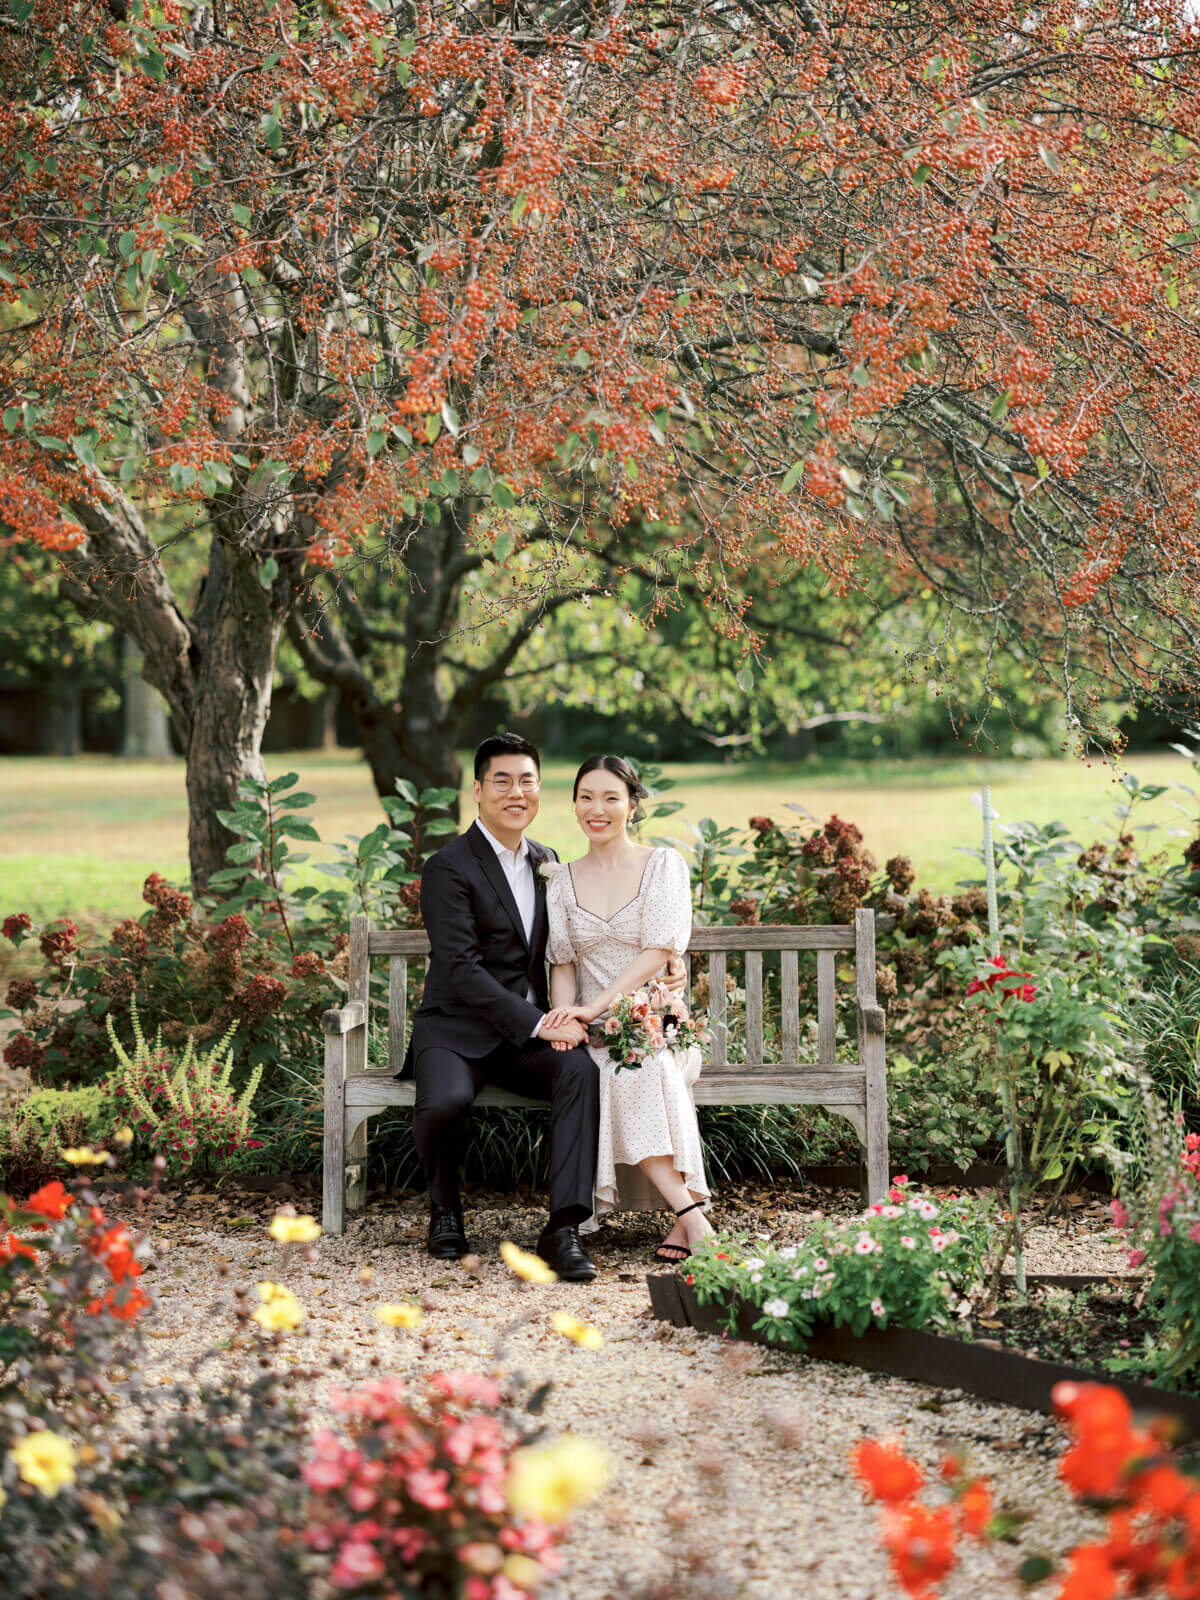 The engaged couple is sitting on a wooden bench amidst beautiful foliage in orange and yellow hues. Image by Jenny Fu Studio